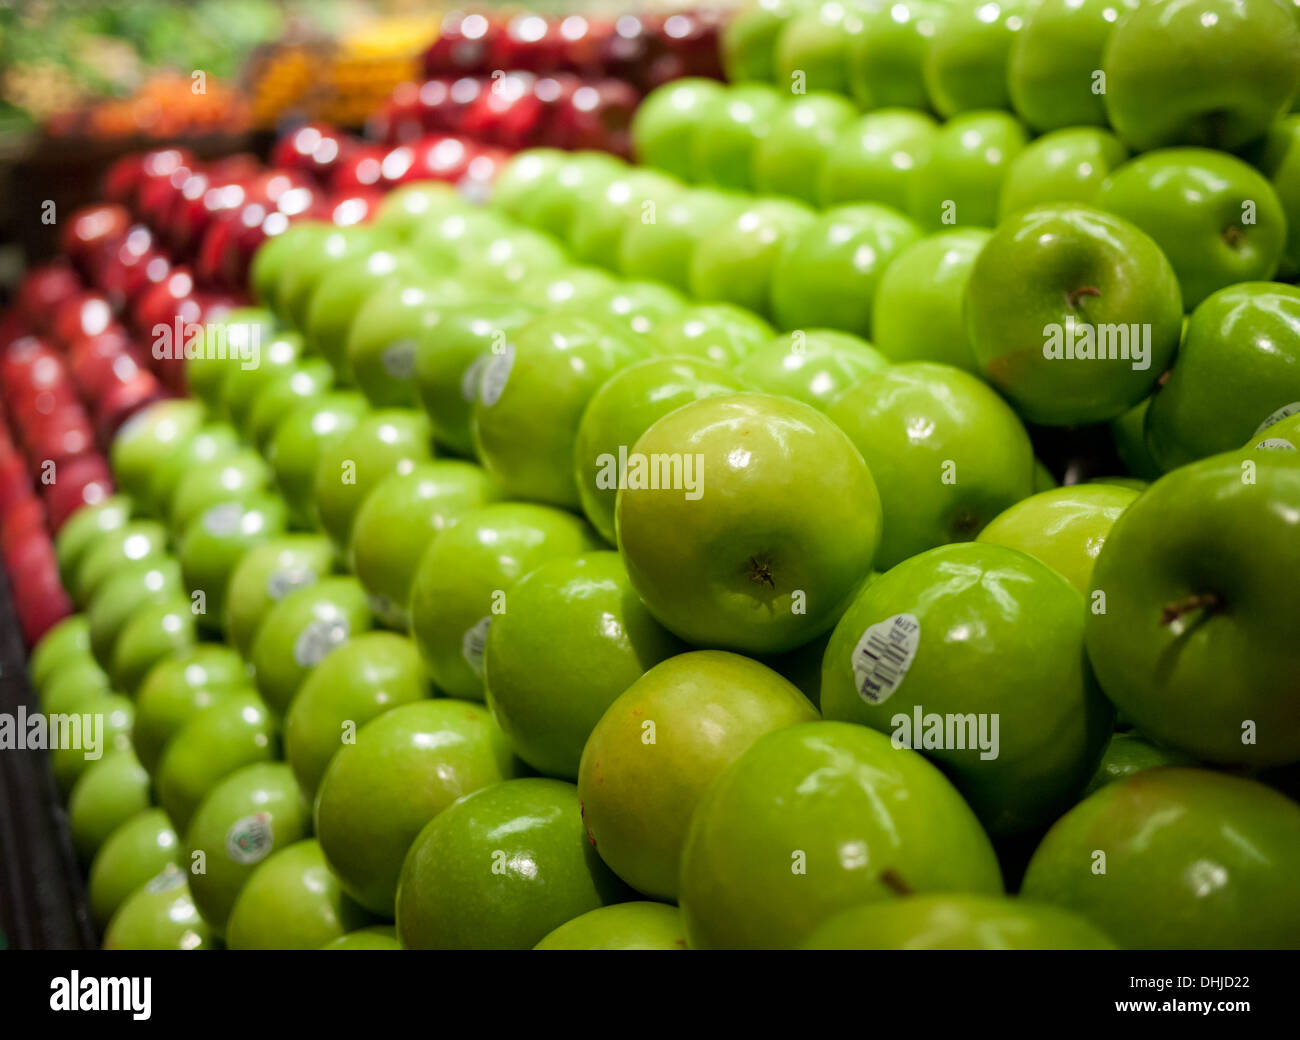 Green 'Granny Smith' apples in the foreground, red 'Red Delicious' apples in the background, in a grocery store. Stock Photo